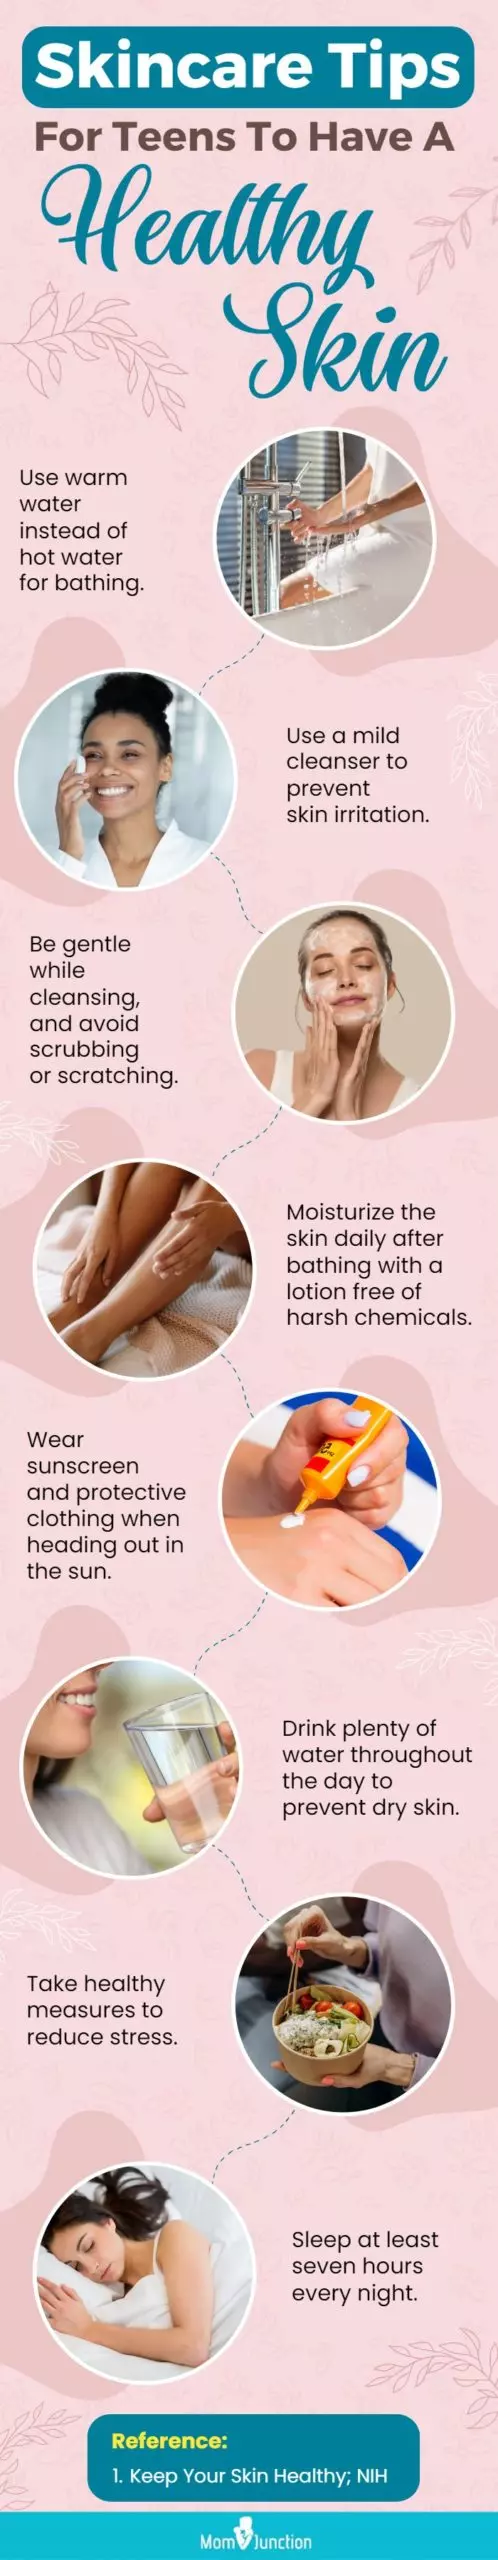 Skincare Tips For Teens For A Healthy Skin (infographic)